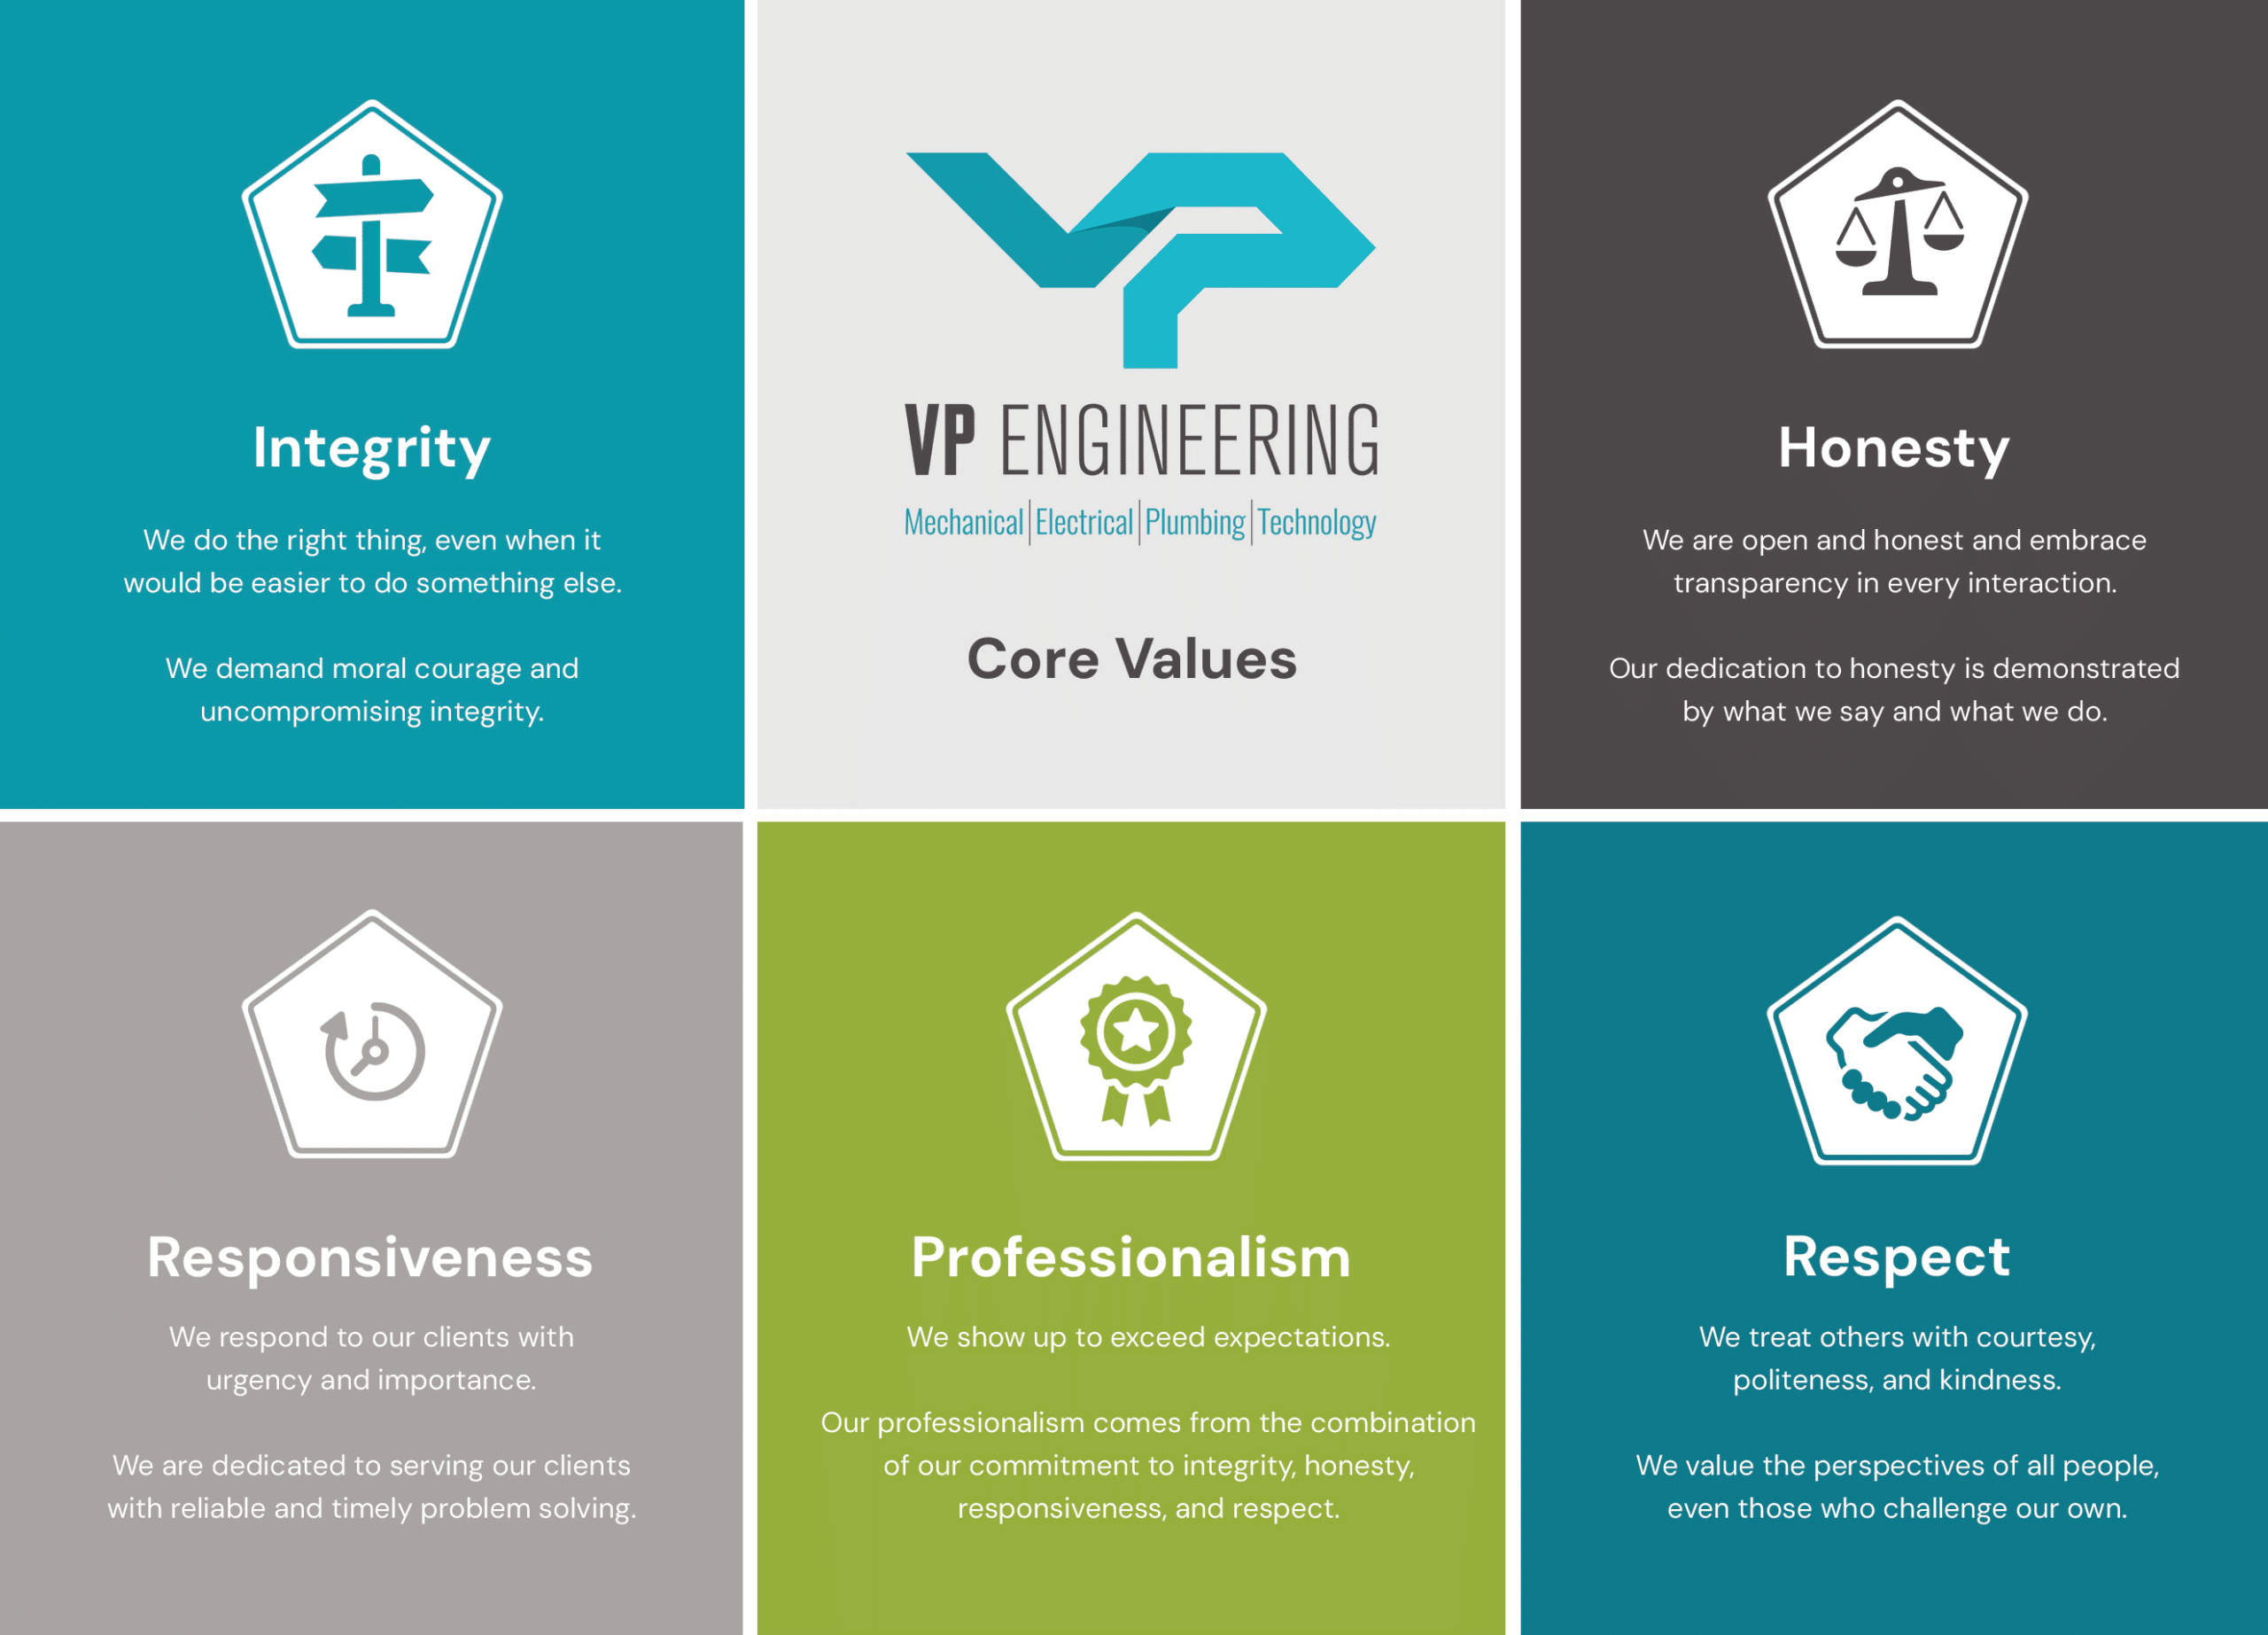 The core values of vp engineering.